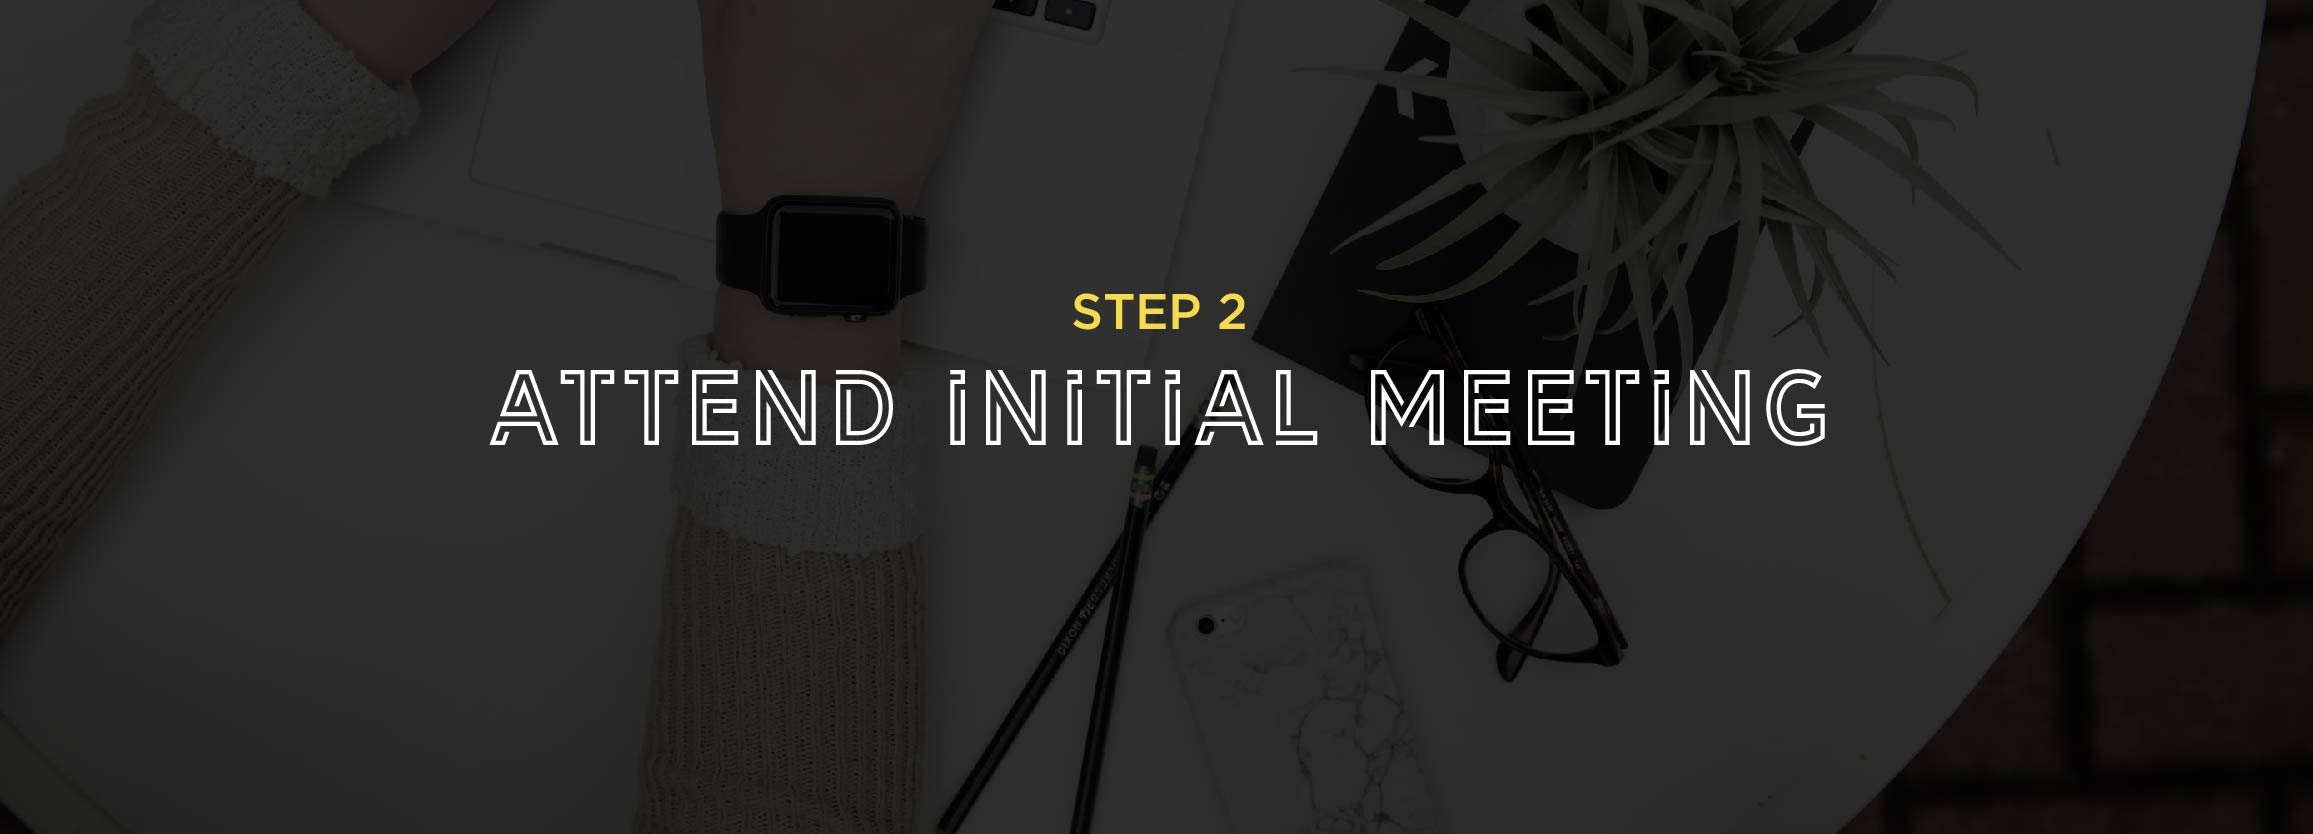 Step 2 - Attend initial meeting